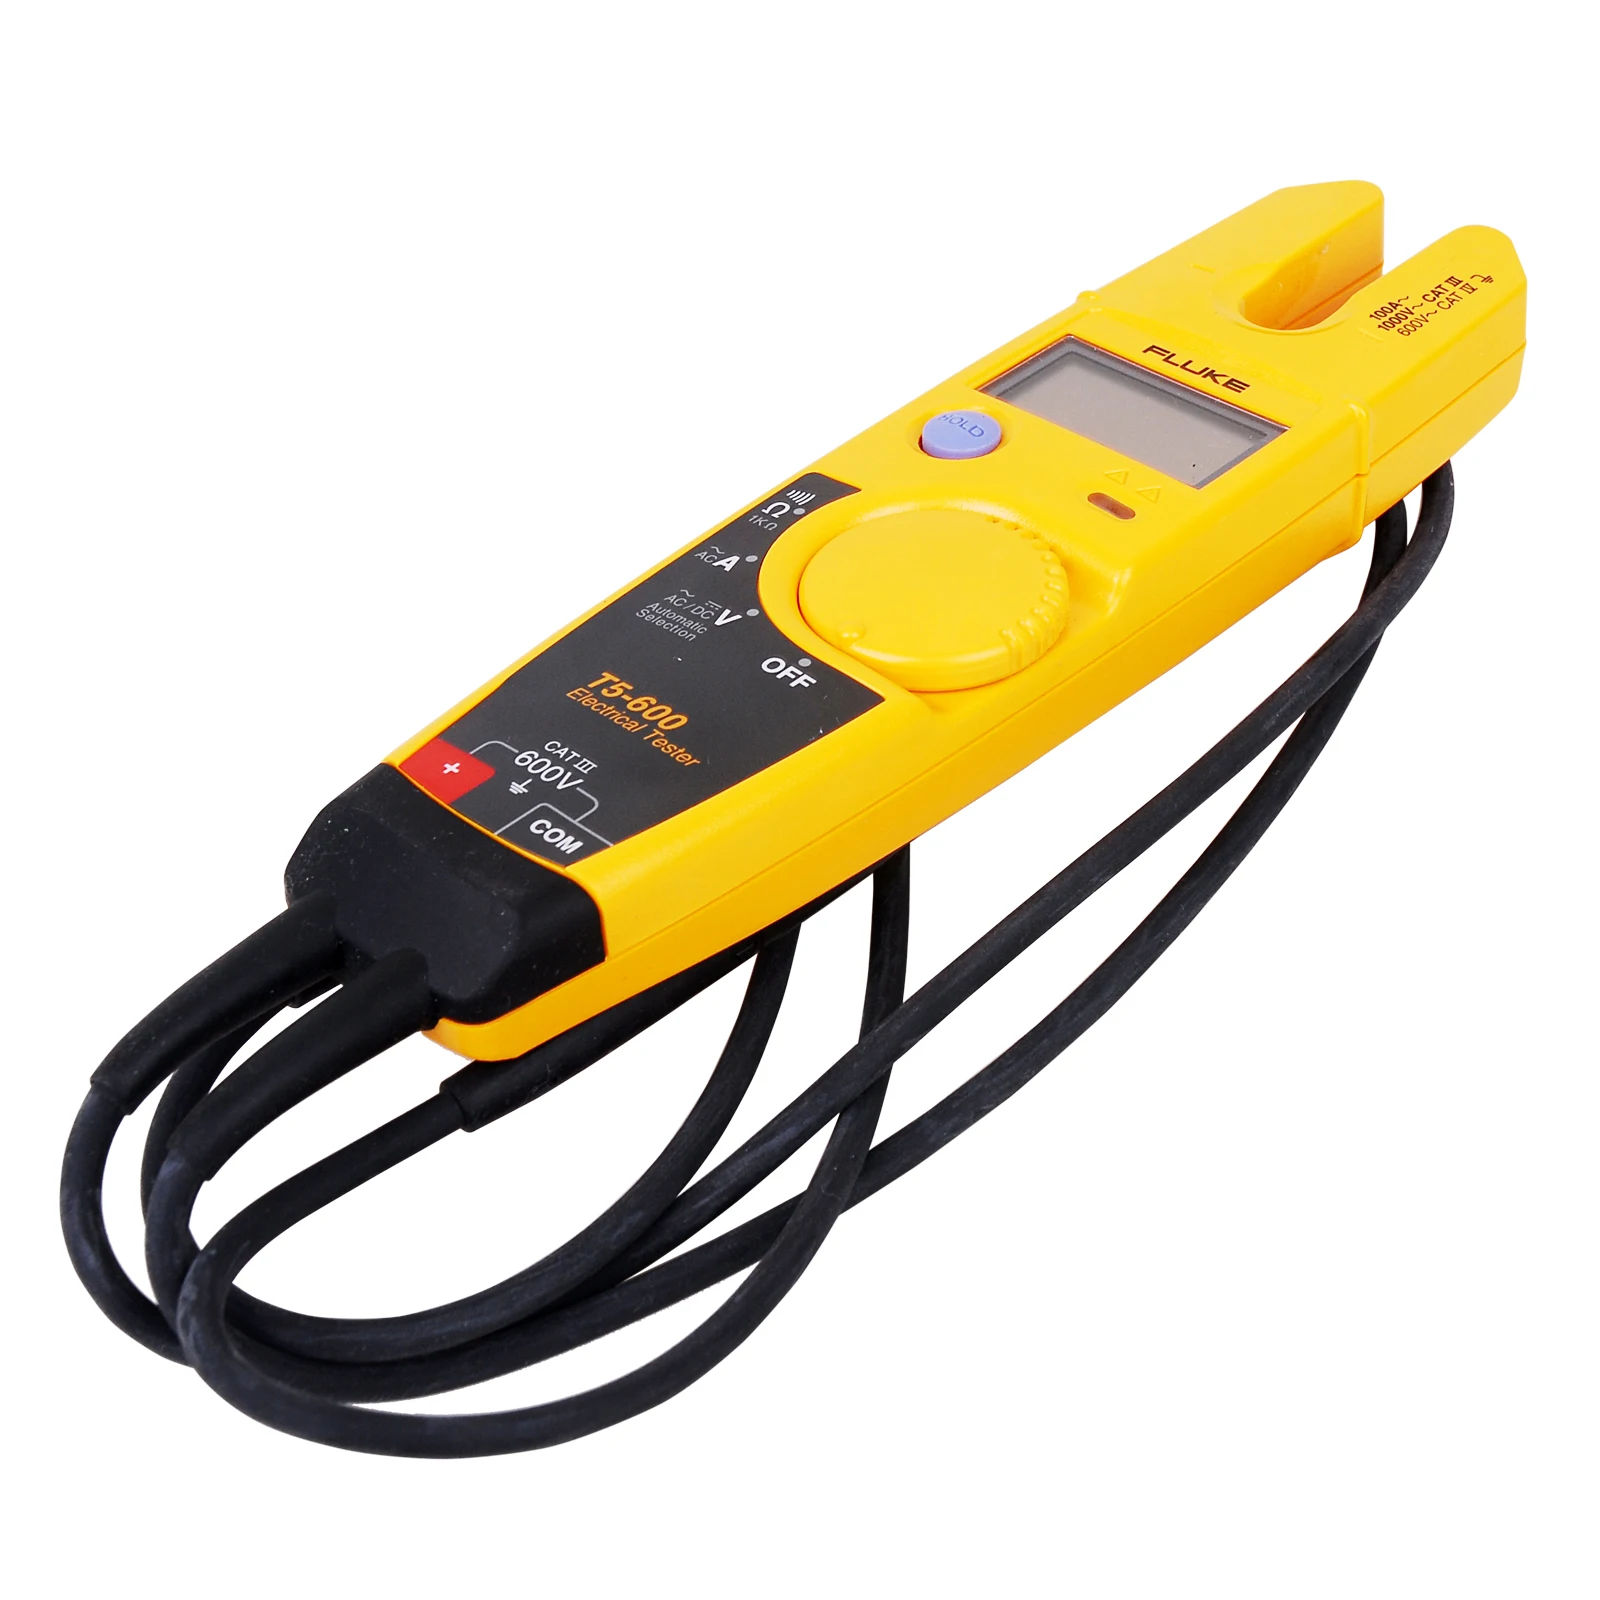 Fluke T5-600 Clamp Continuity Current Electrical Tester Clamp meter New 